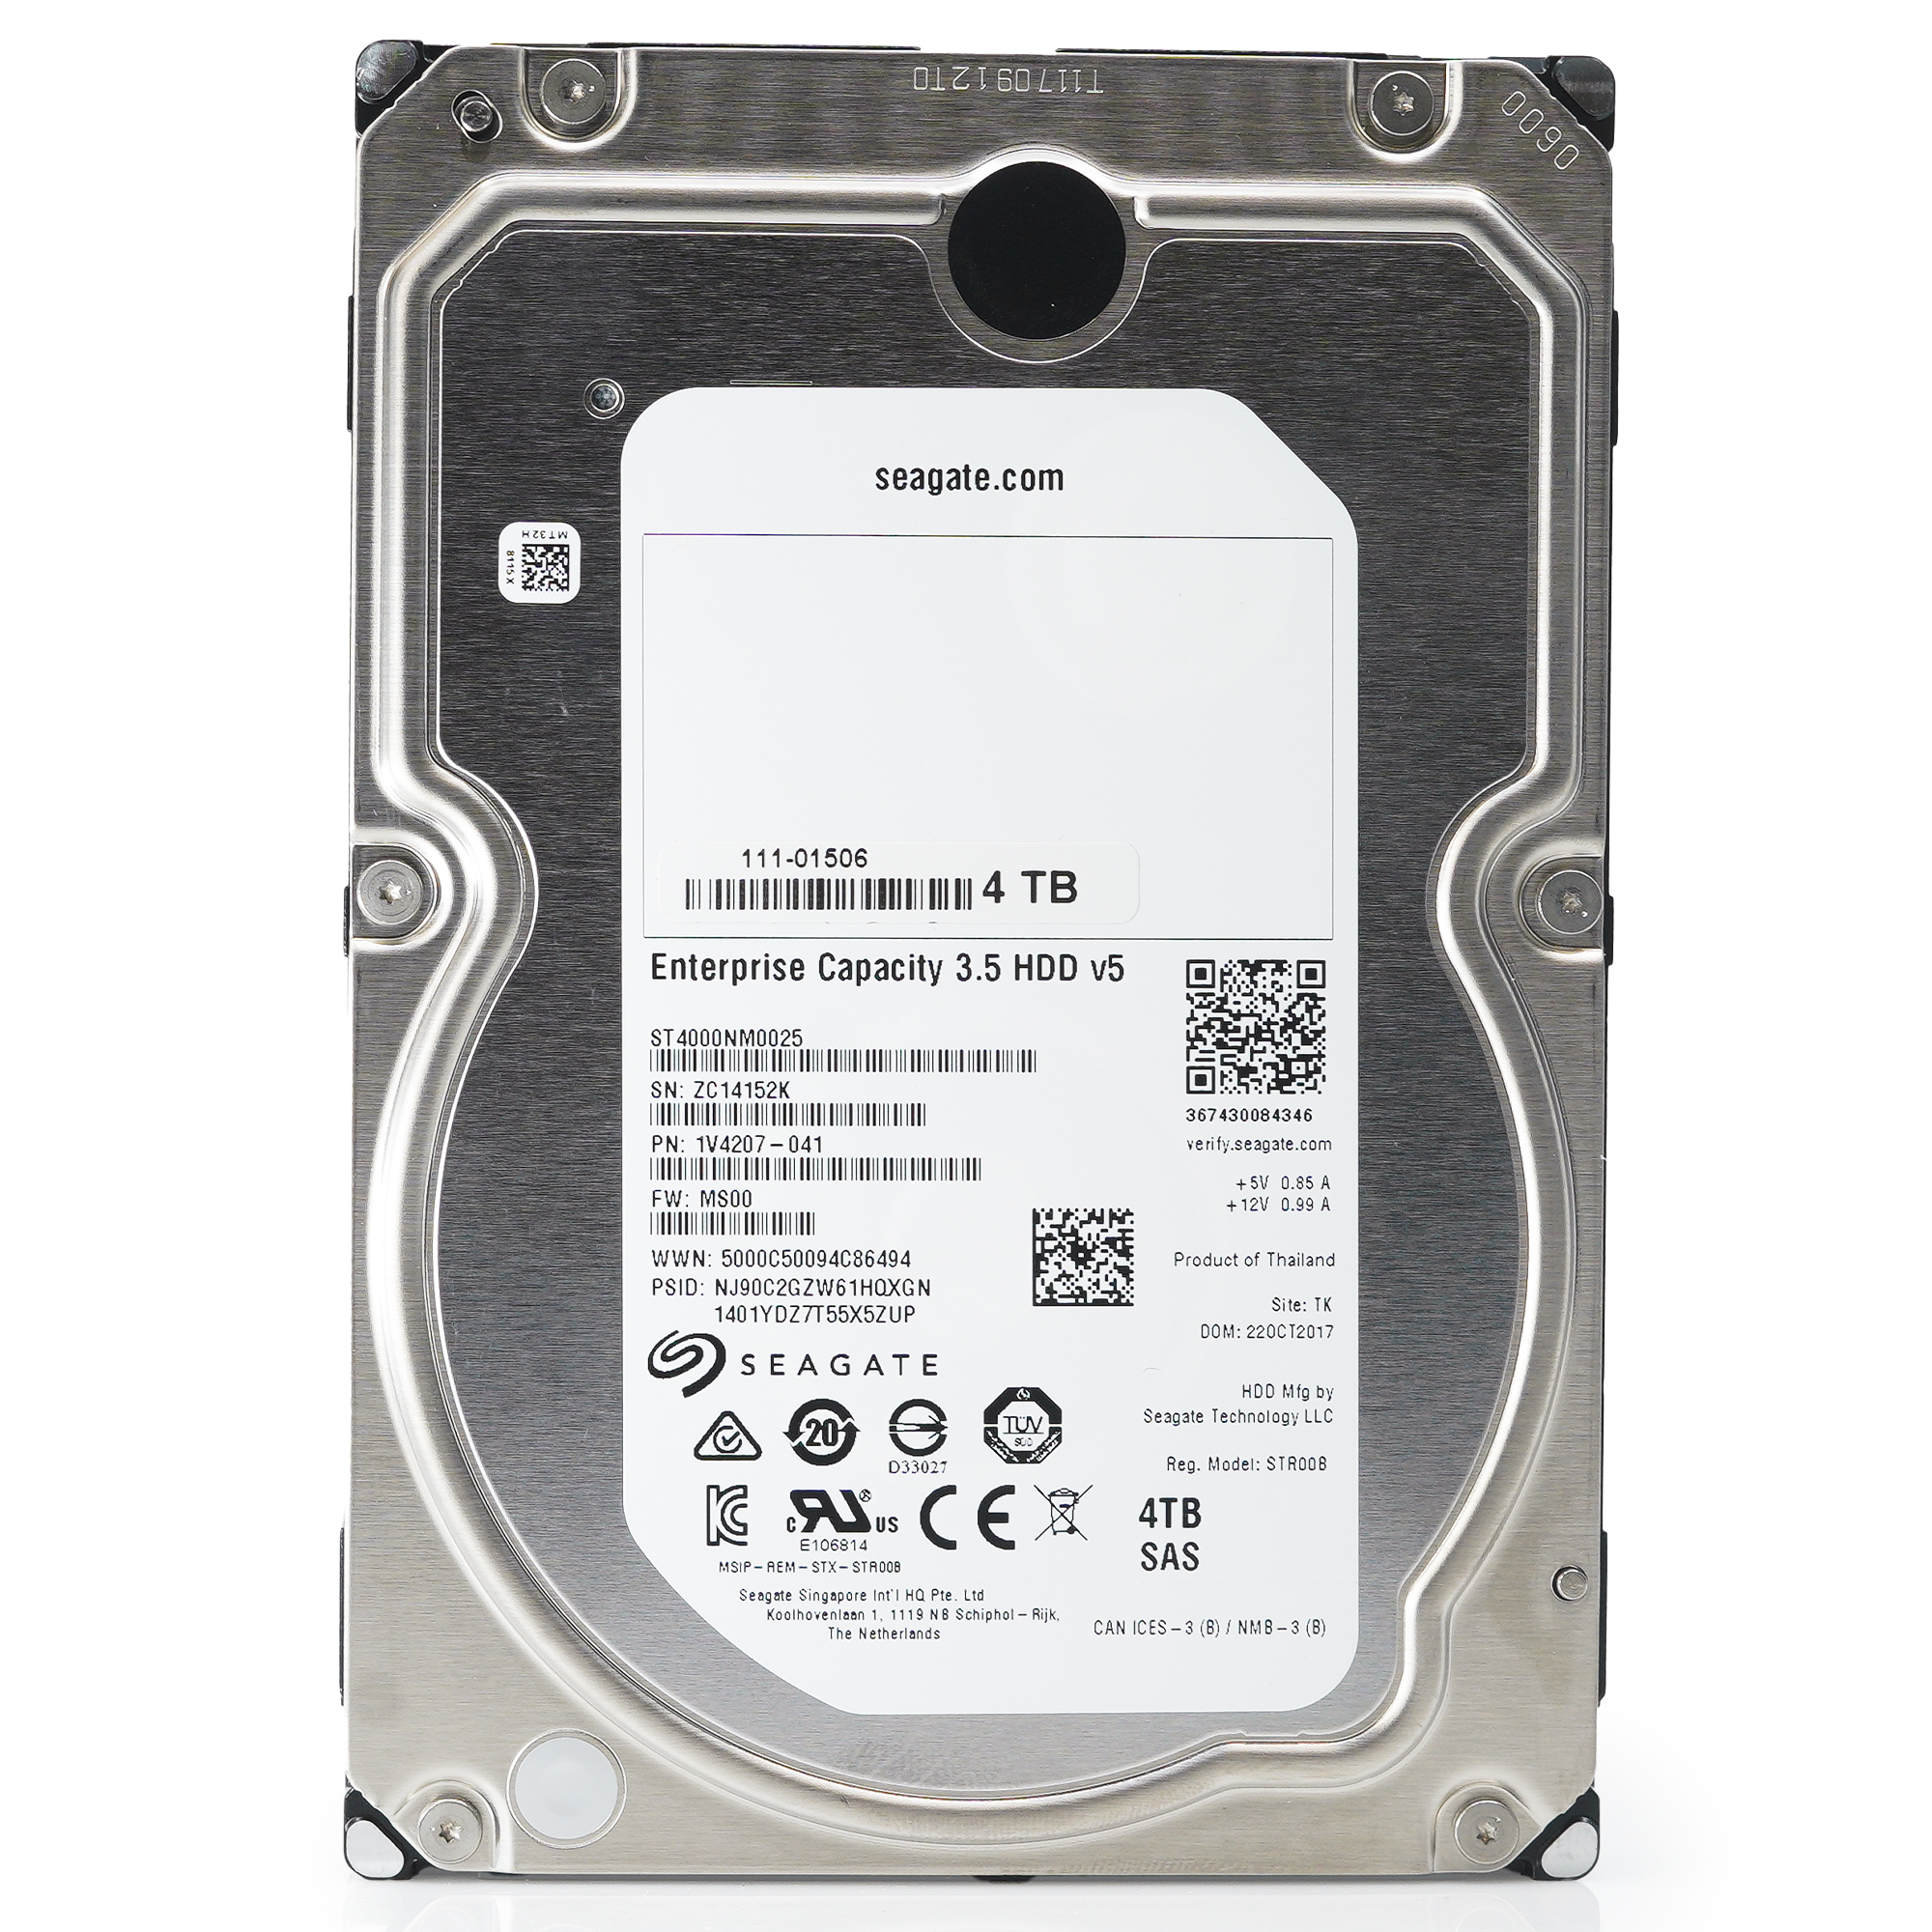 Seagate Exos 7E8 ST4000NM0025 4TB 7.2K RPM SAS 12Gb/s 512n 128MB 3.5" Hard Drive - Front View